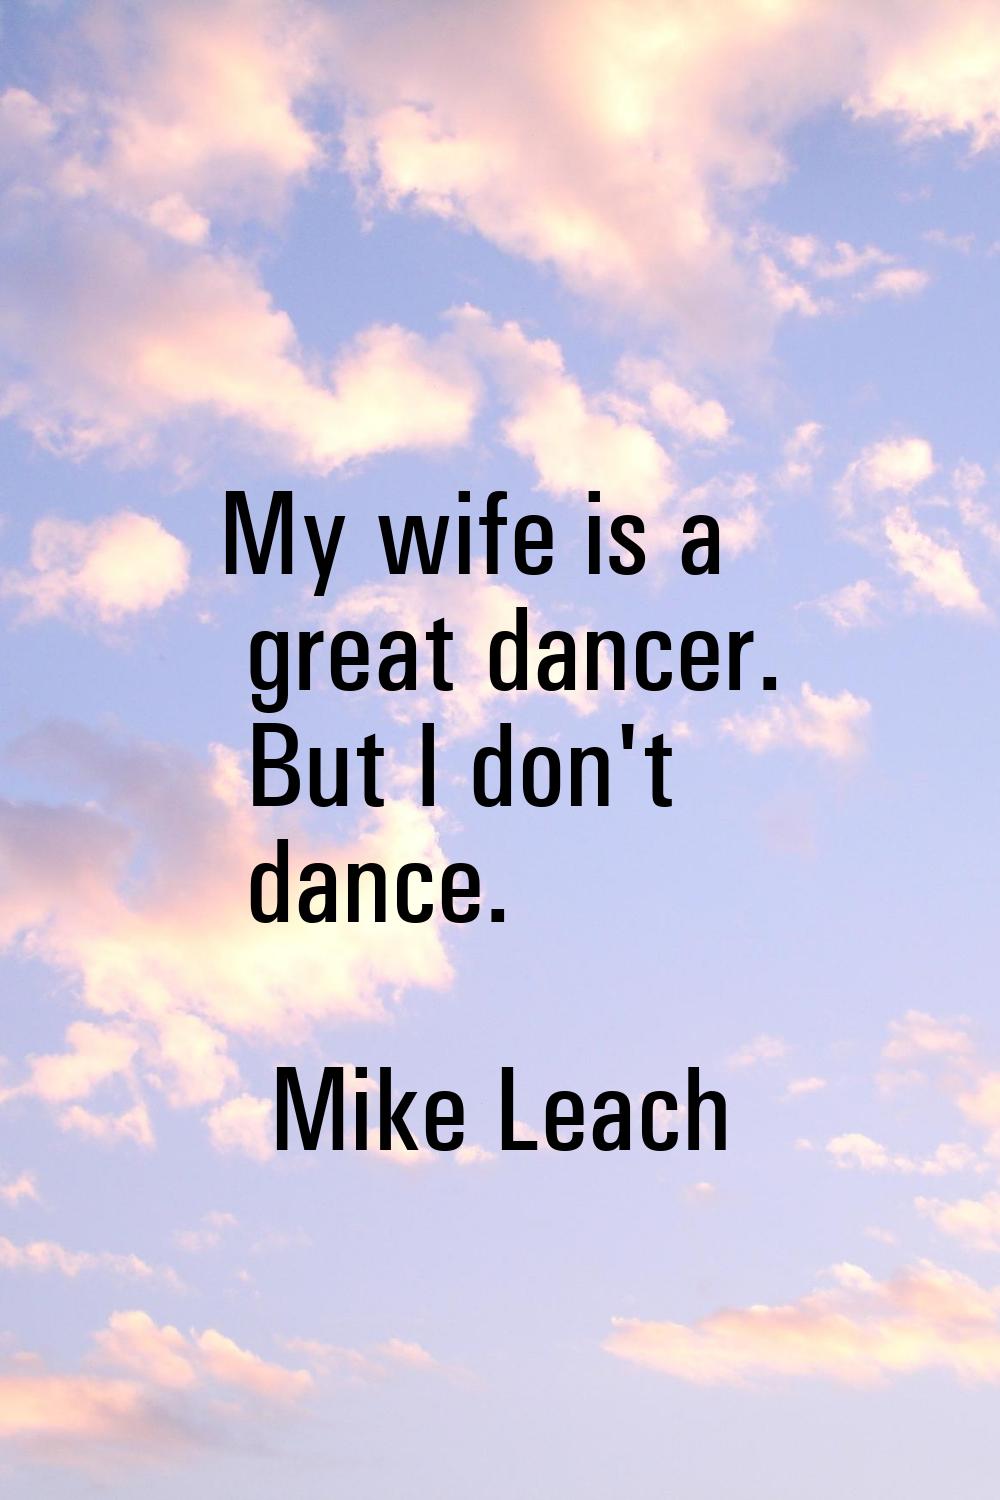 My wife is a great dancer. But I don't dance.